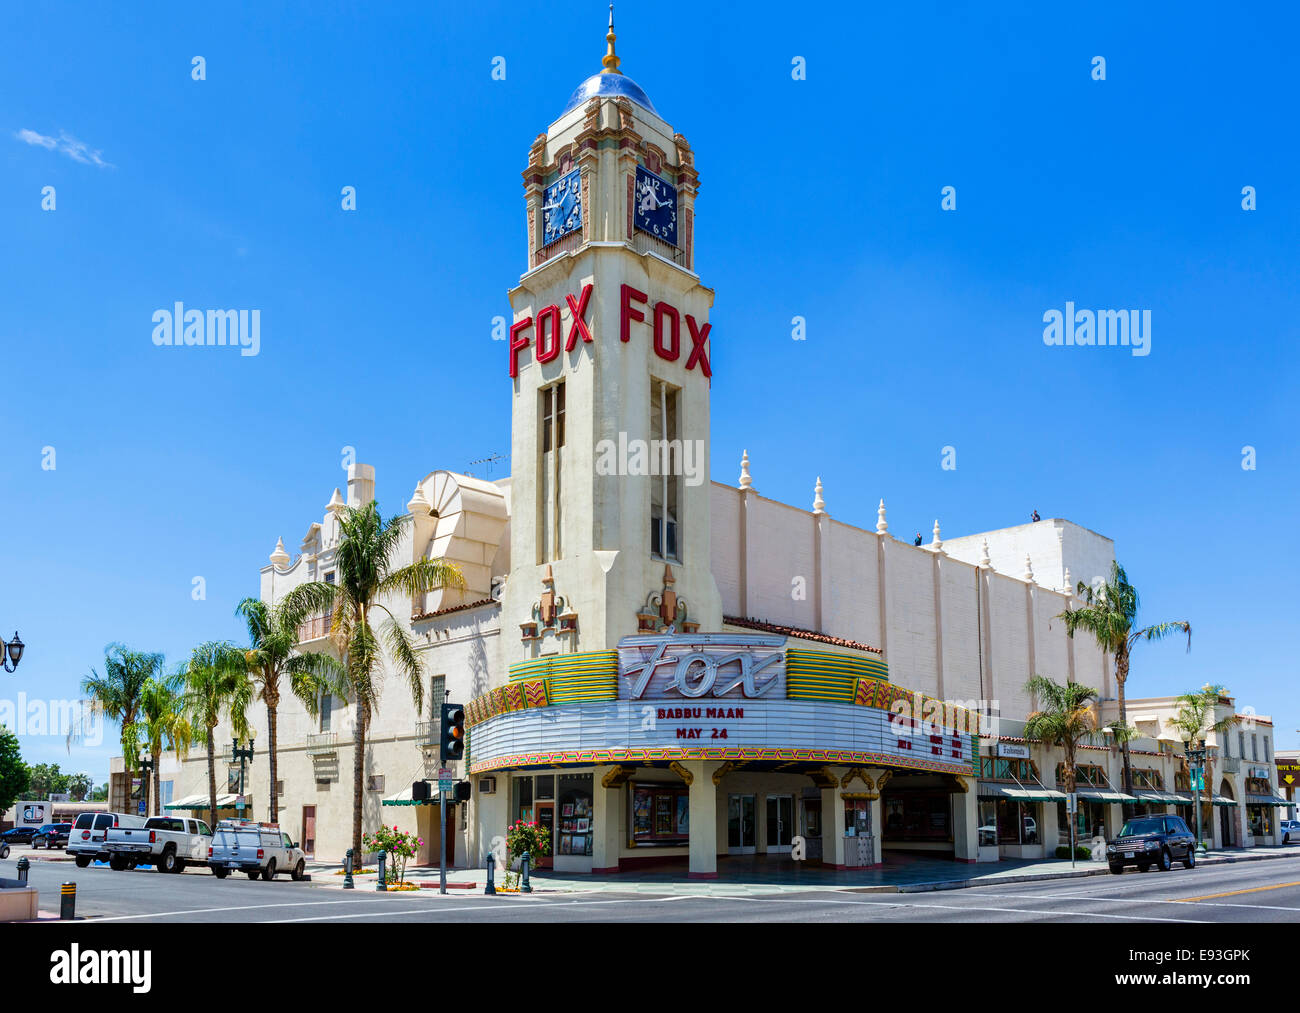 The Fox Theater on H Street in downtown Bakersfield, Kern County, California, USA Stock Photo